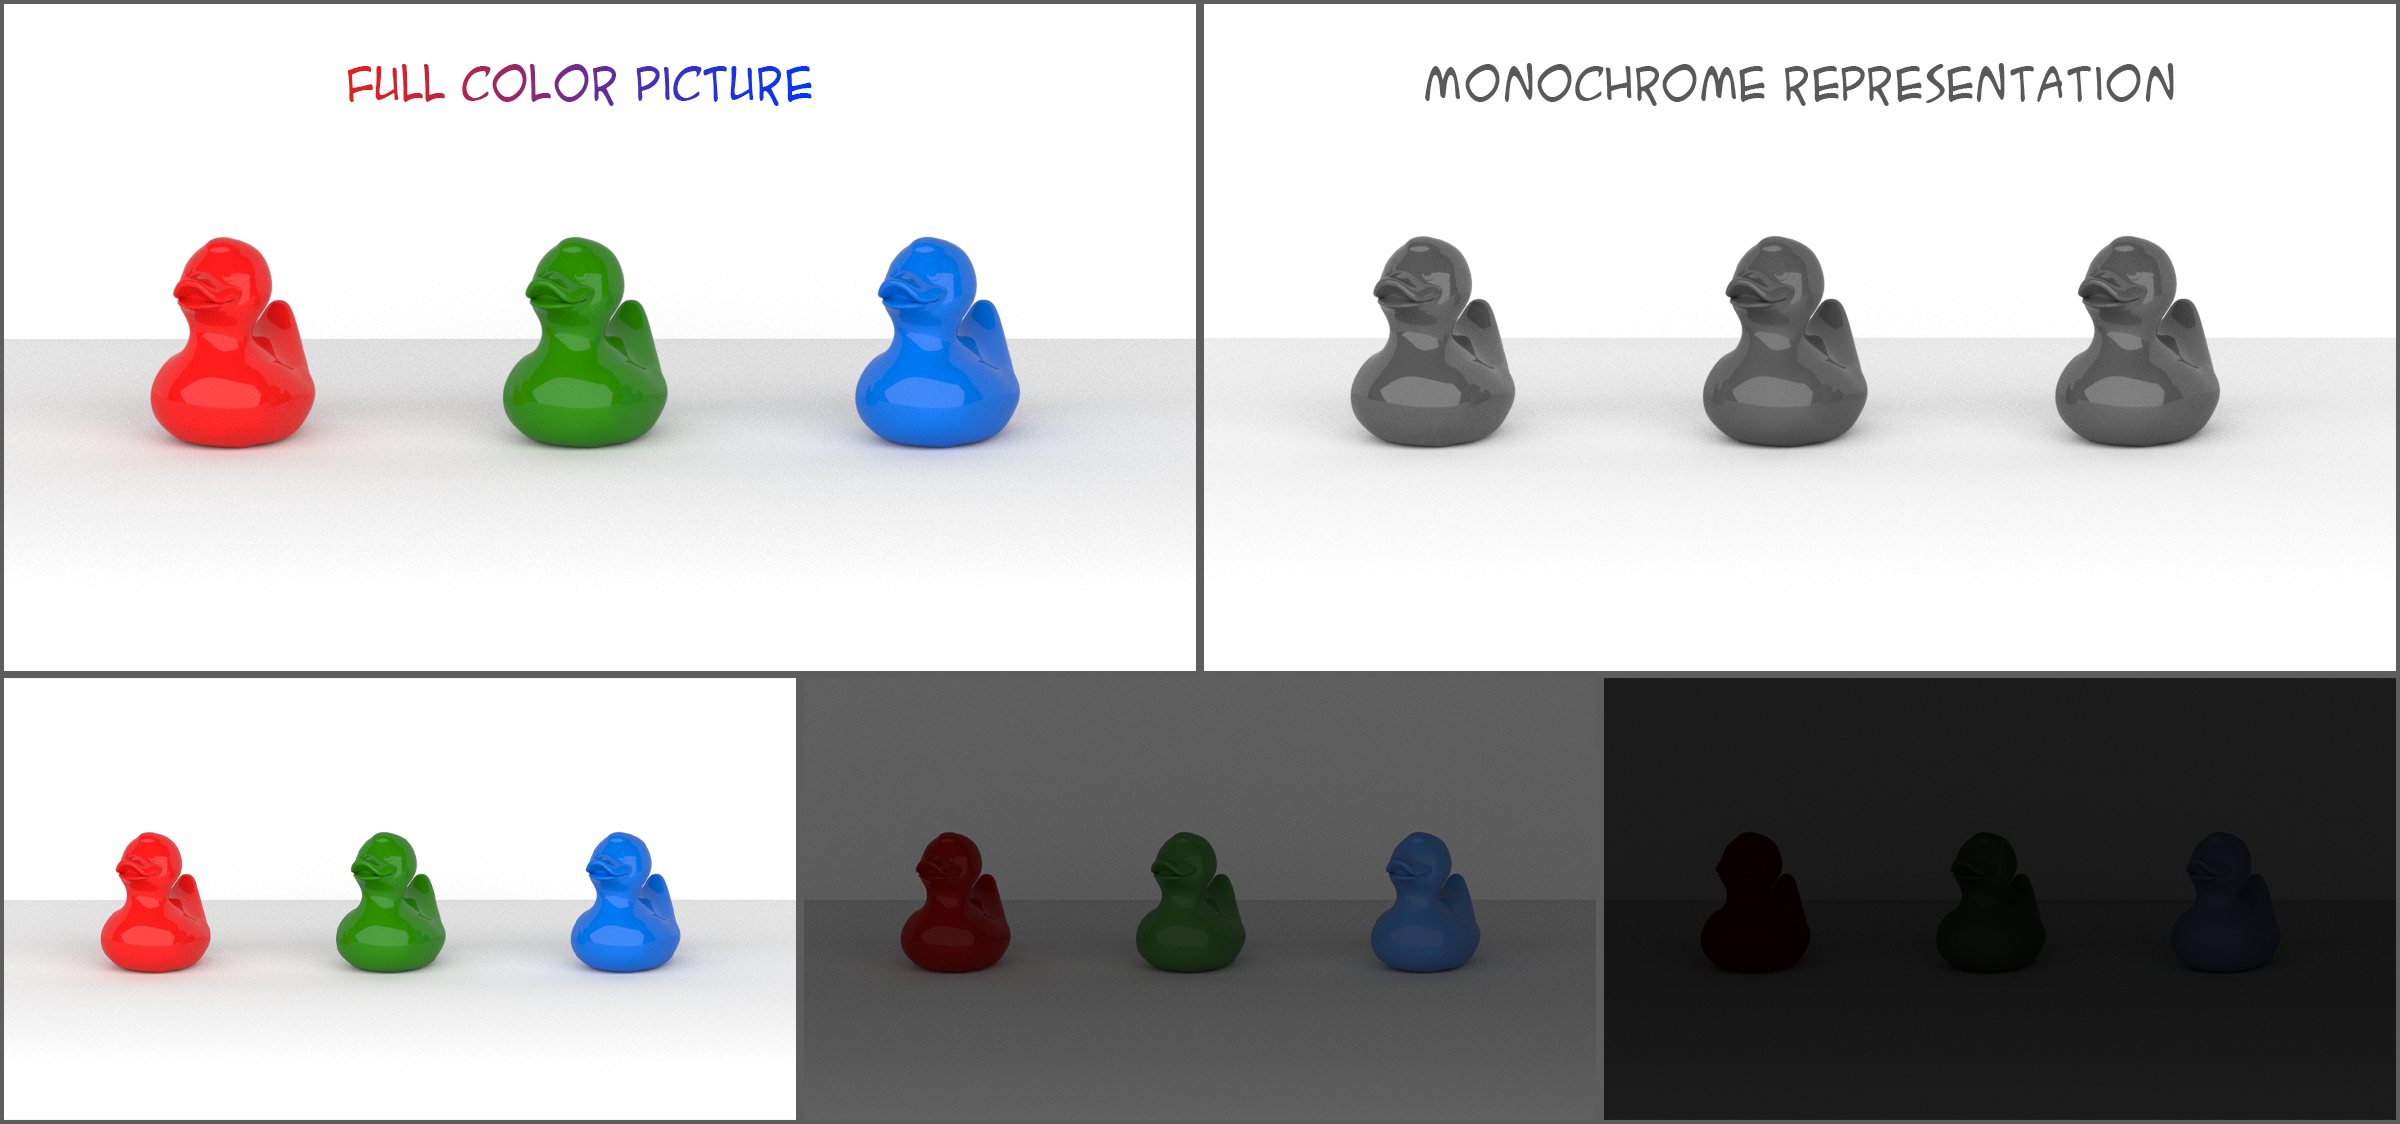 Fig. 2. The ducks in the picture are originally one monochrome brightness in full light. But the less light, the harder it is to distinguish colors, and the red duck quickly darkens, although before it seemed the brightest